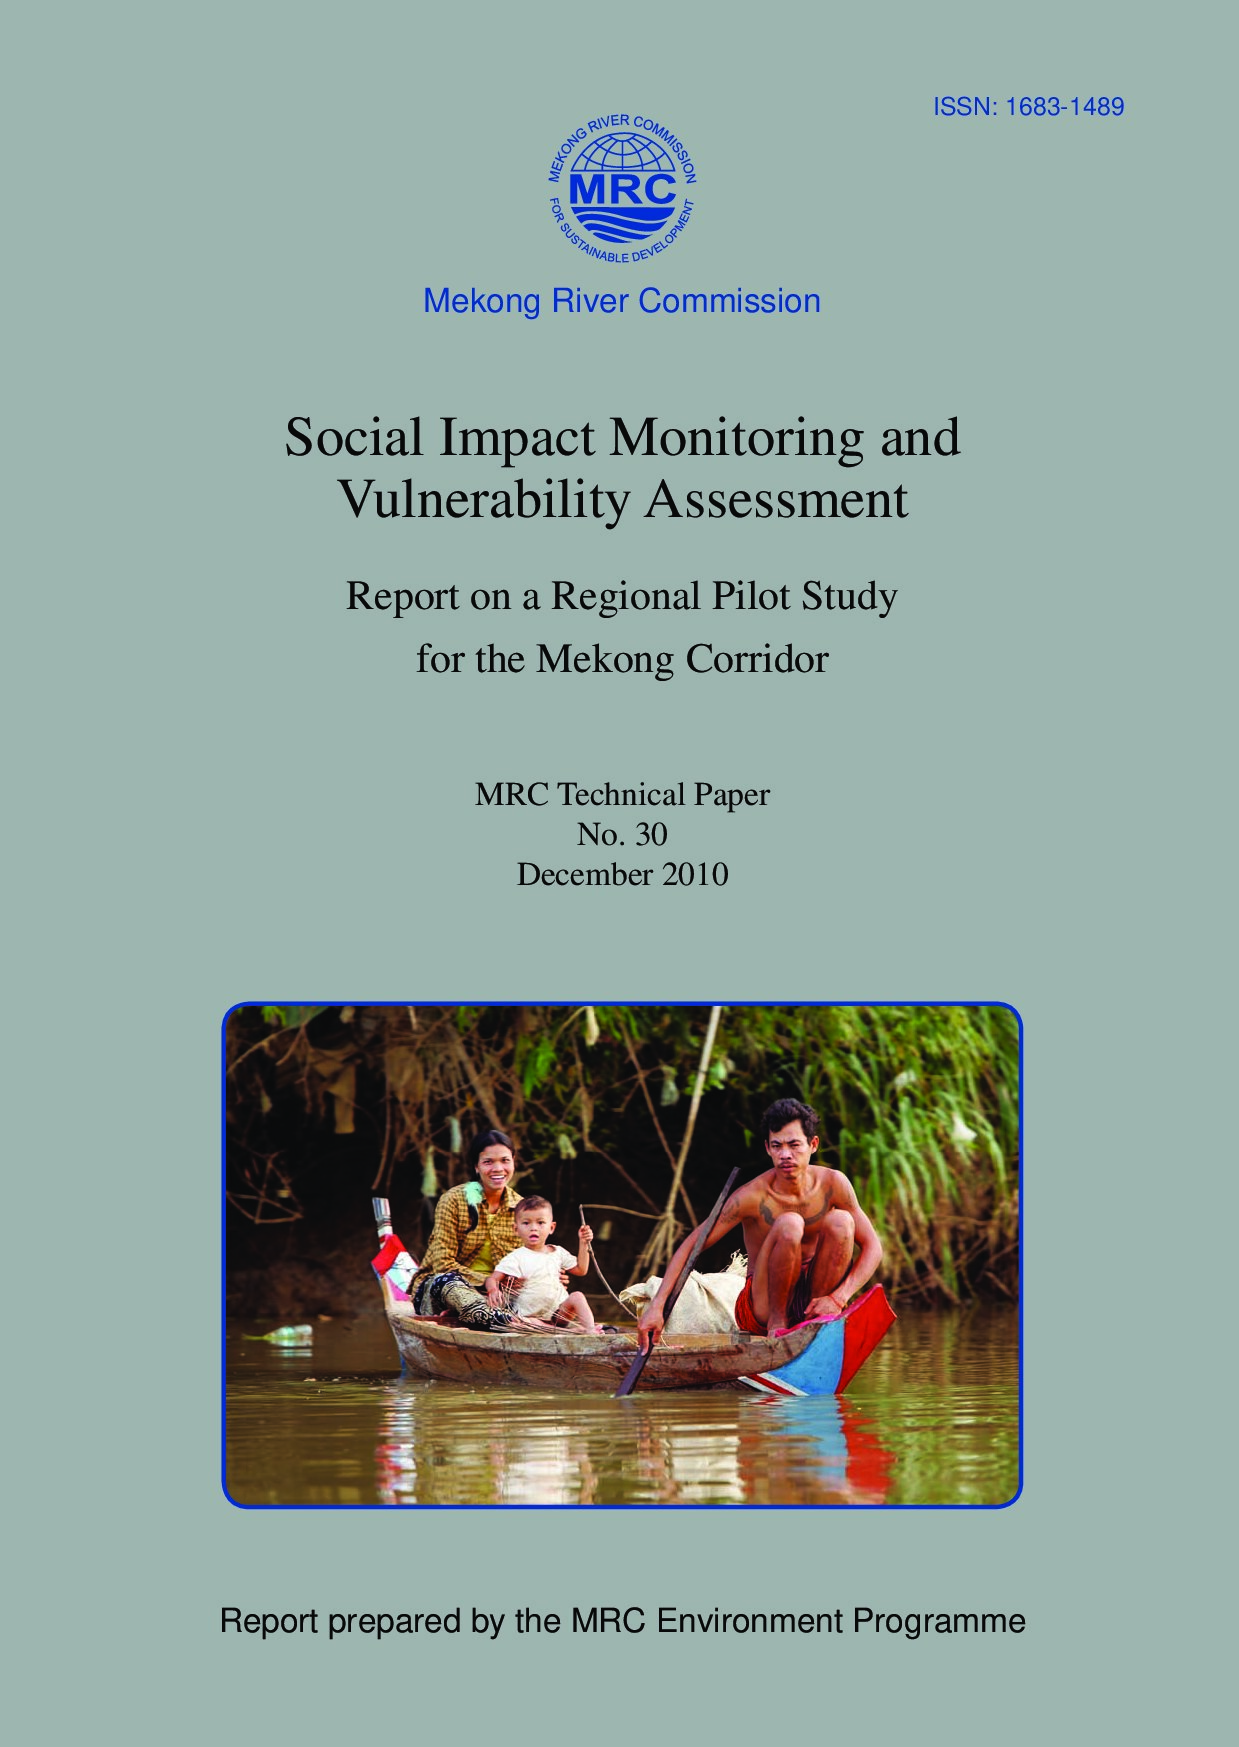 Social Impact Monitoring and Vulnerability Assessment